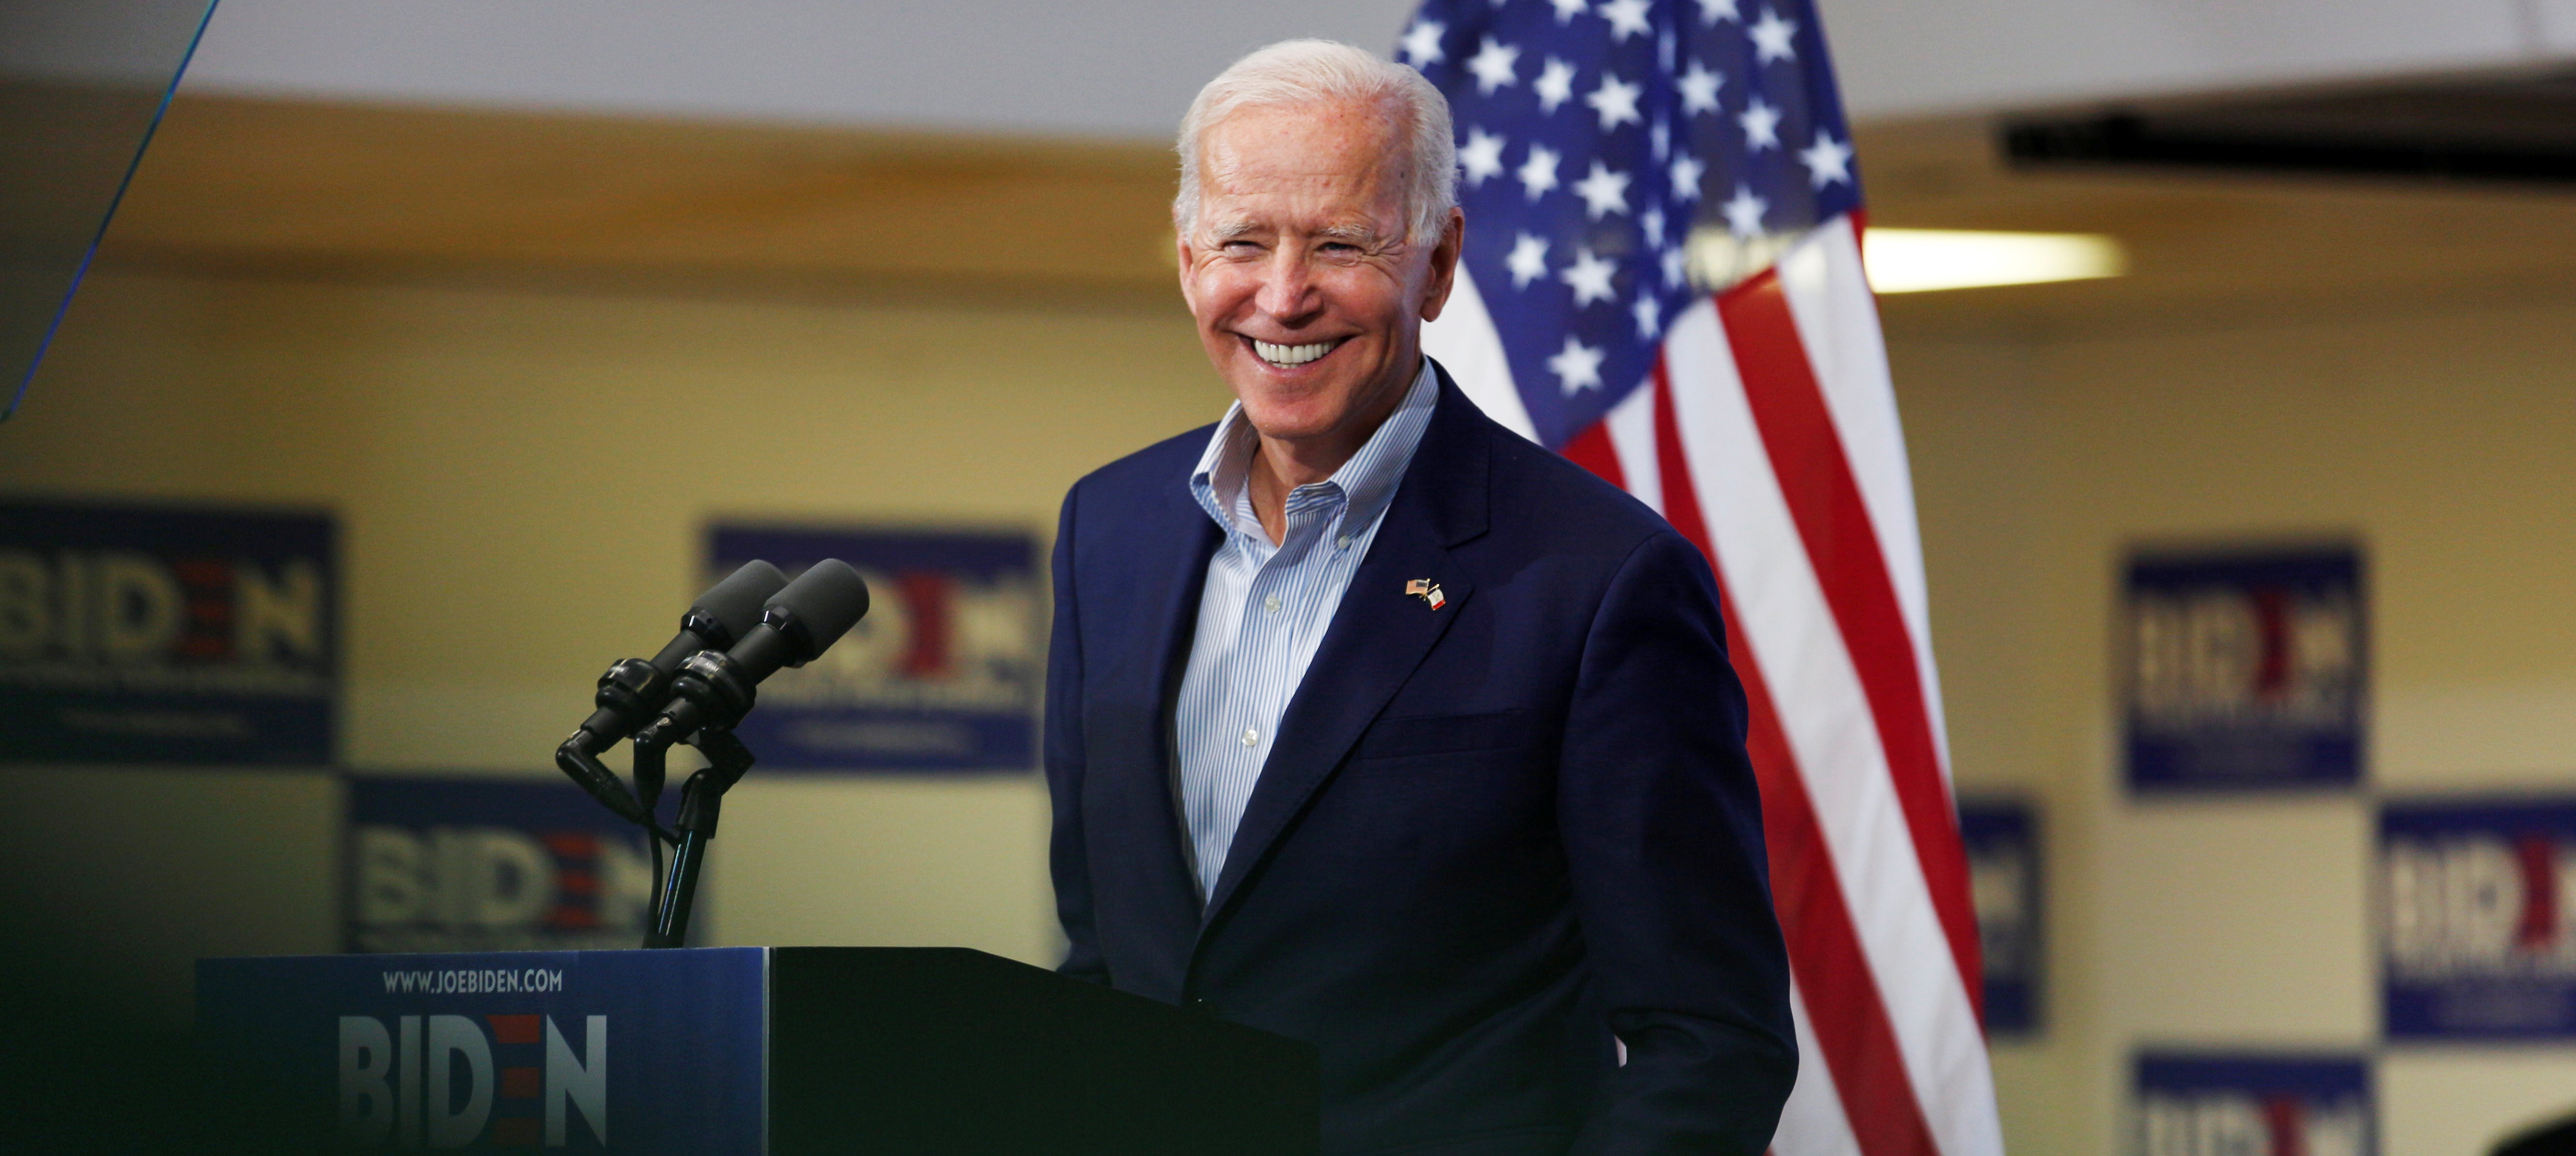 Democratic 2020 U.S. presidential candidate and former Vice President Joe Biden speaks at an event at the Mississippi Valley Fairgrounds in Davenport, Iowa, U.S. June 11, 2019. REUTERS/Jordan Gale